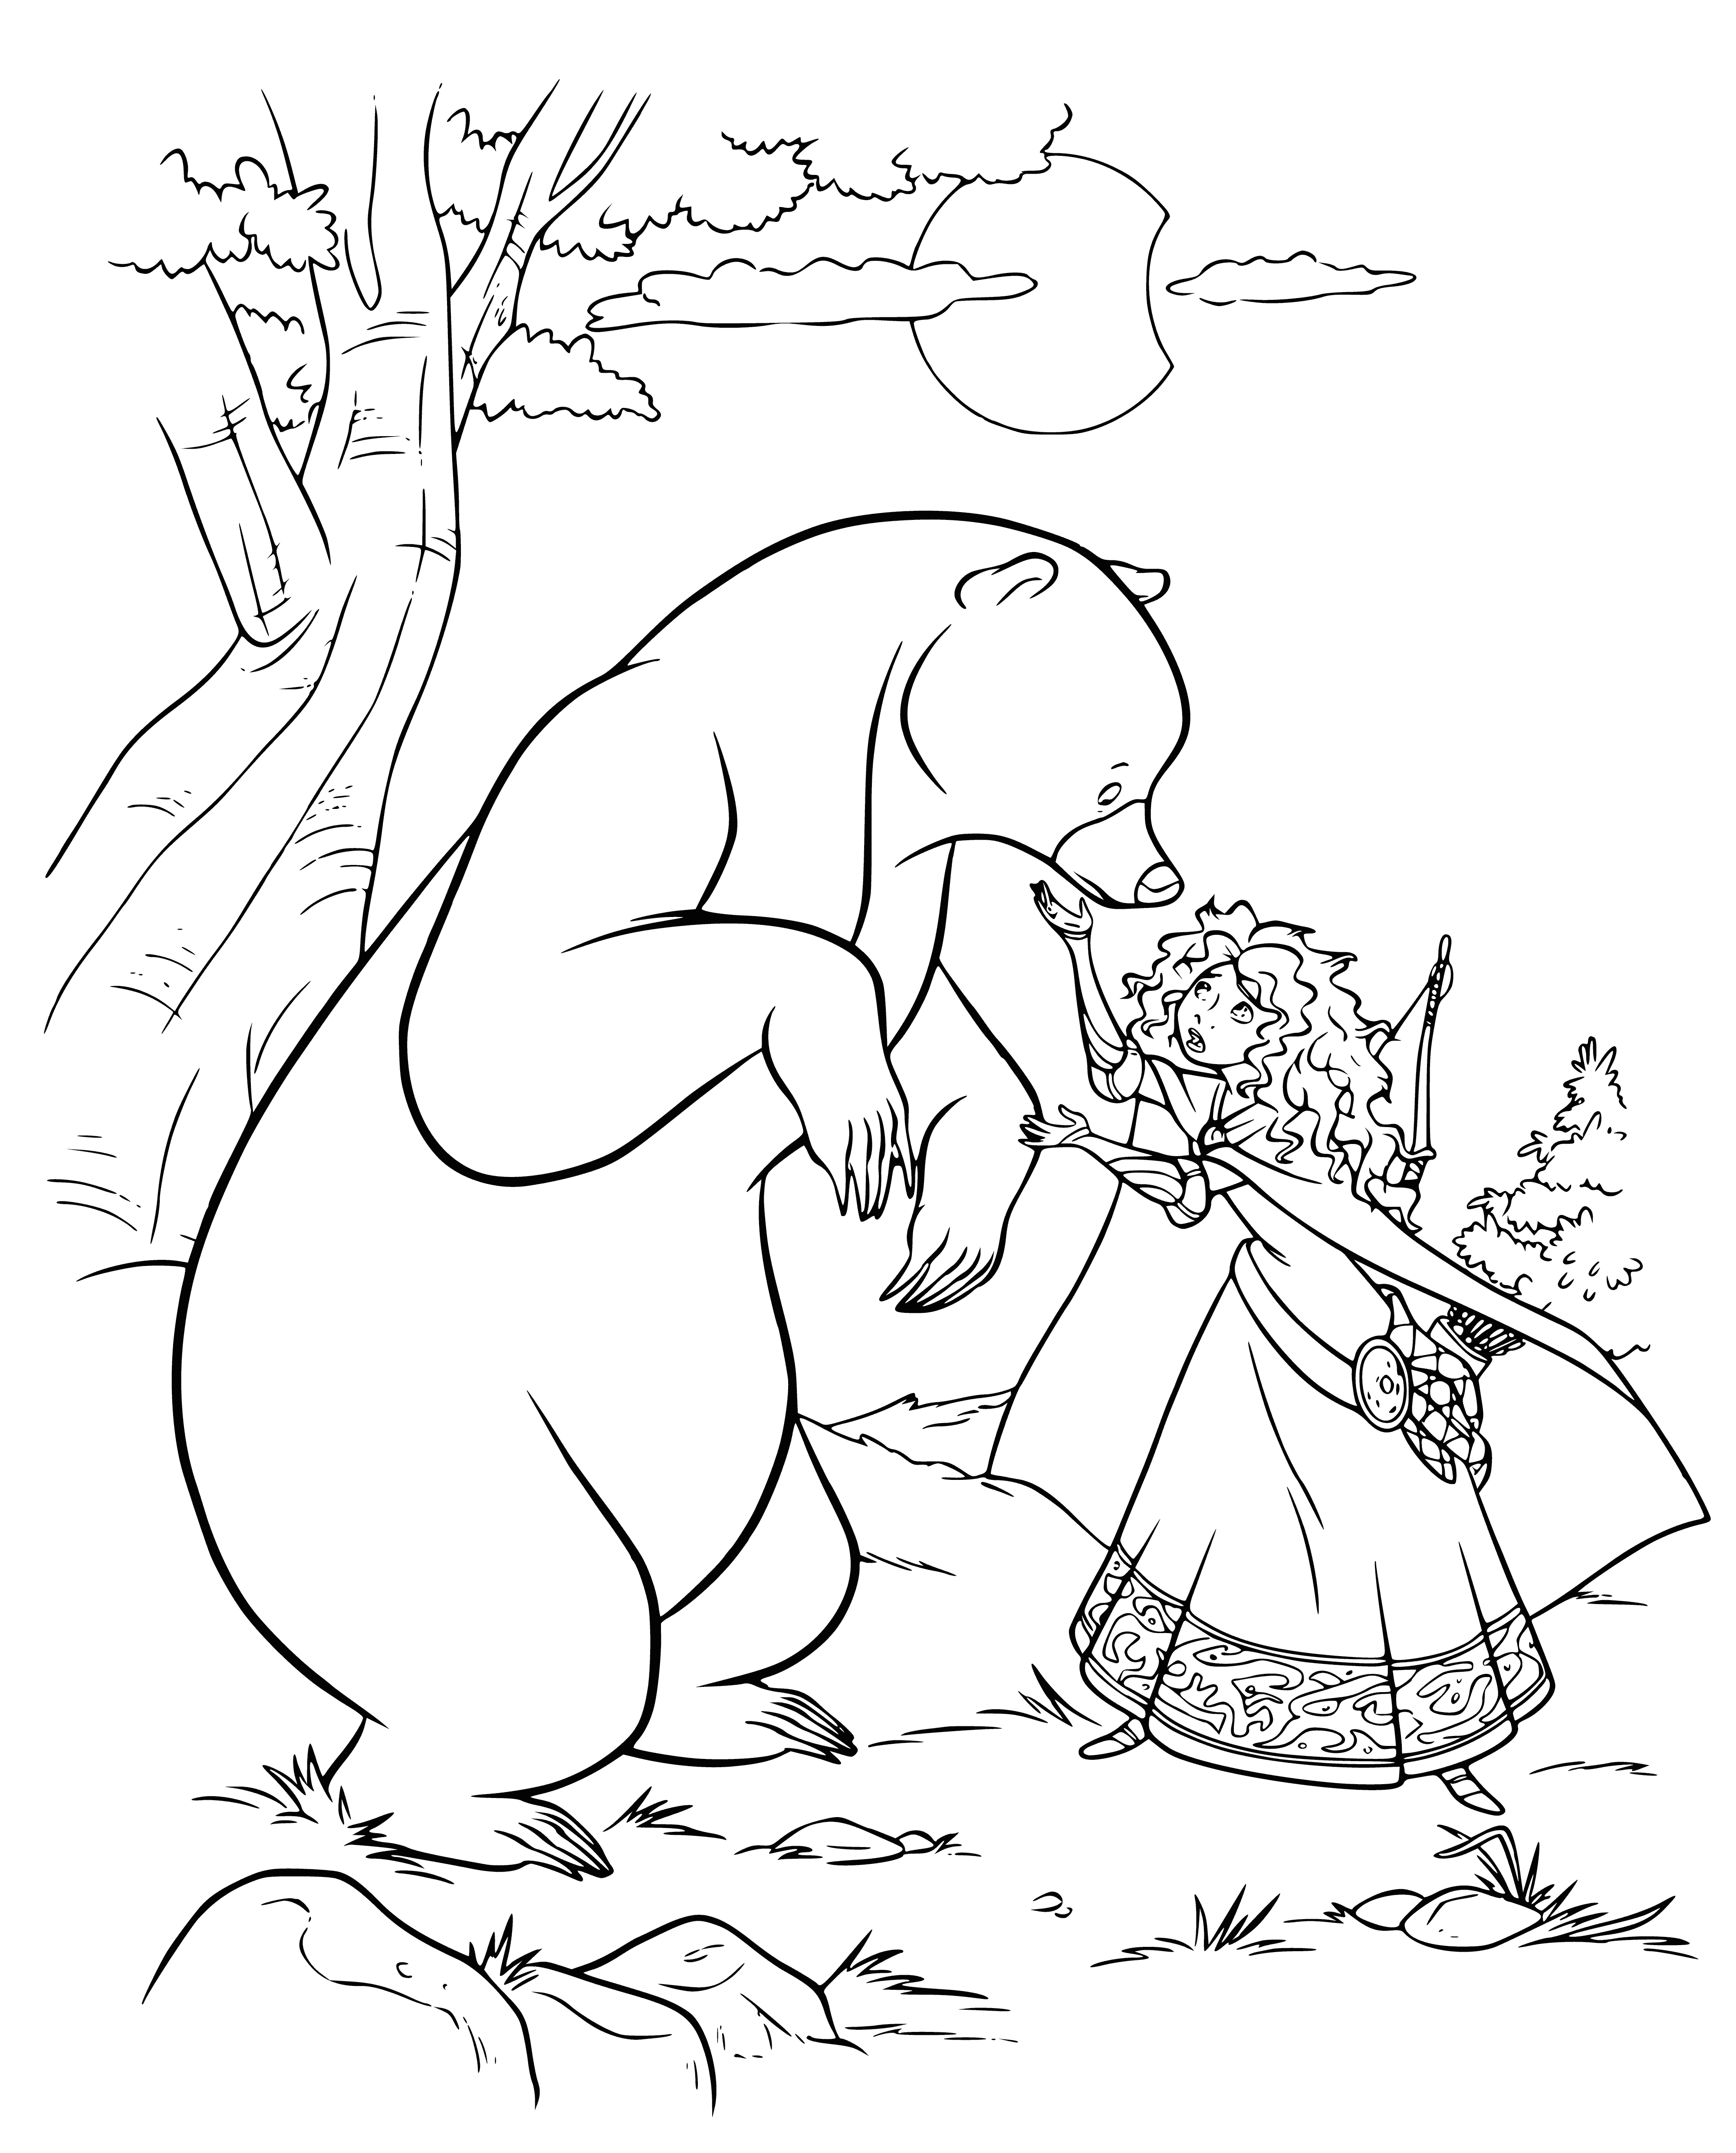 coloring page: Merida apologizes to the bear queen, who looks unyielding.